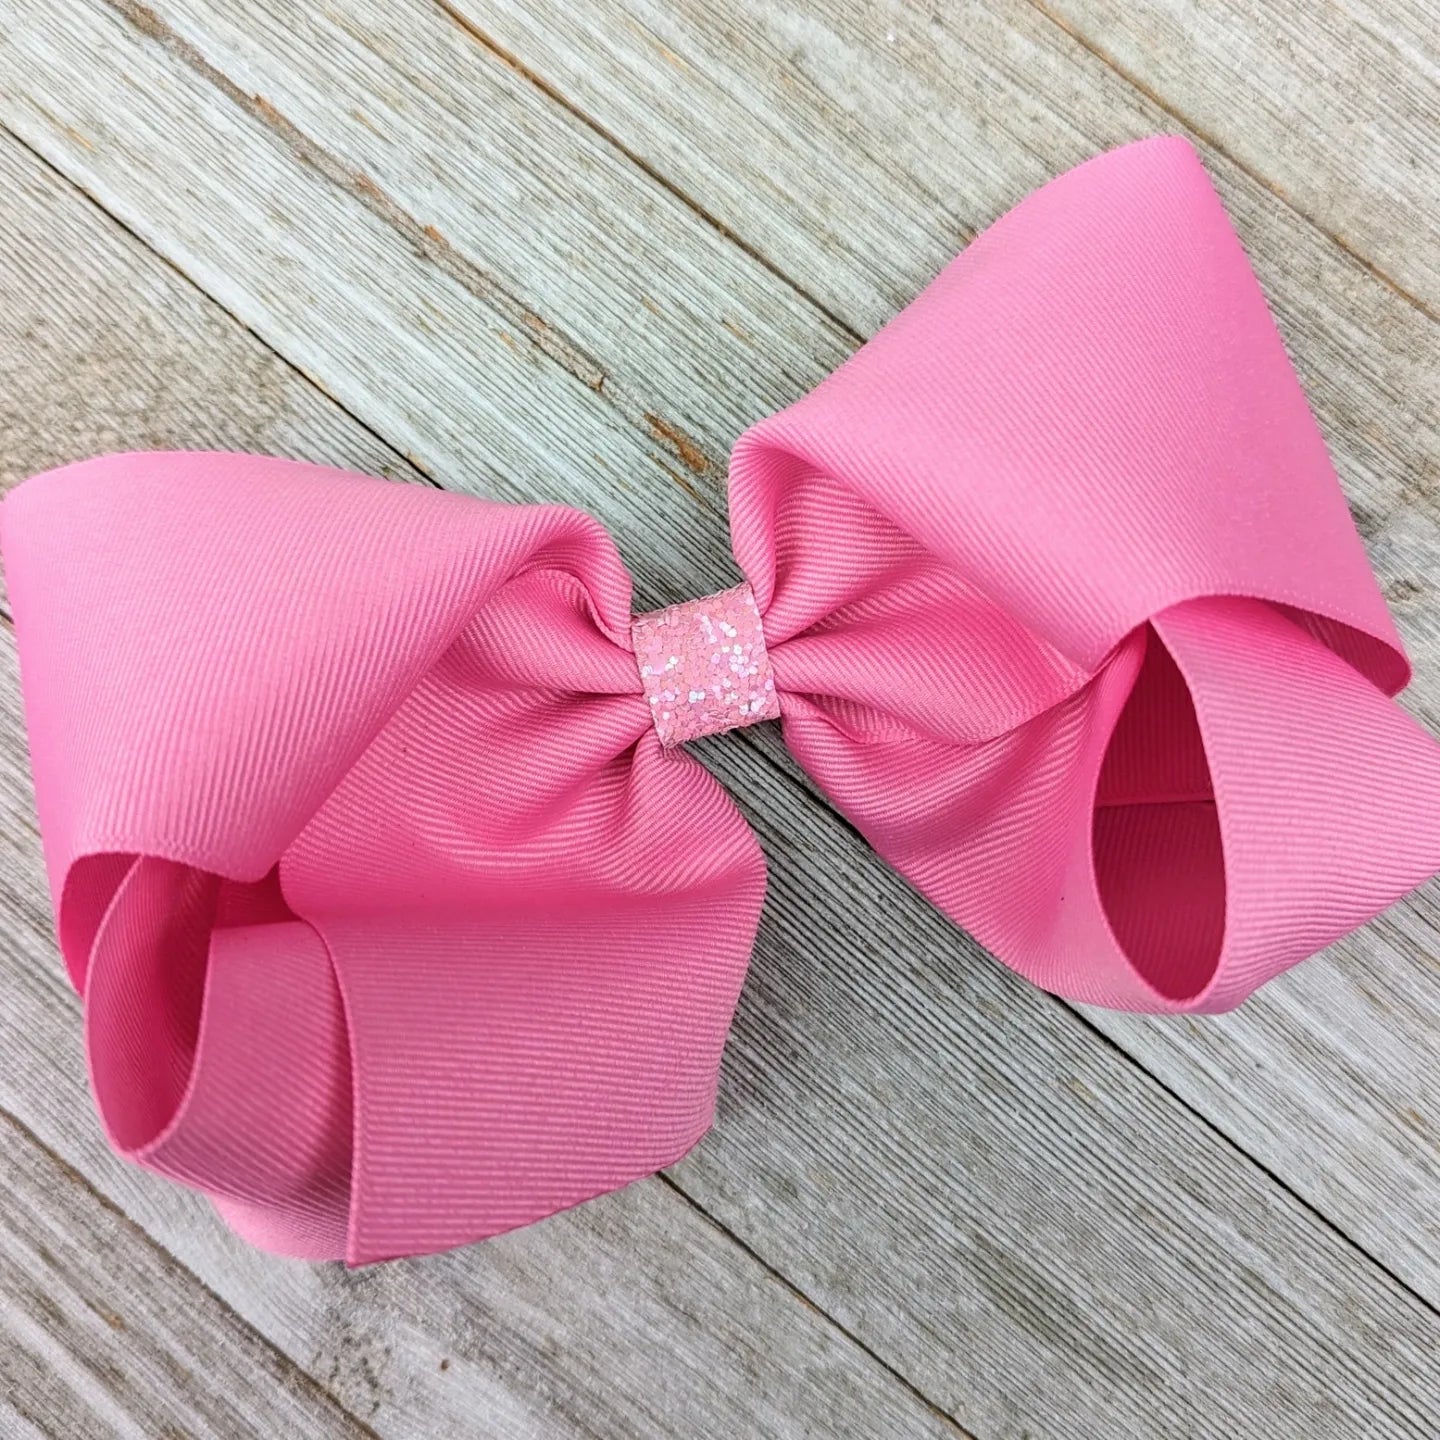 CLEARANCE 8 Barbie Pink Color Ribbon Hair Bow – Magnificent Treasures Bows